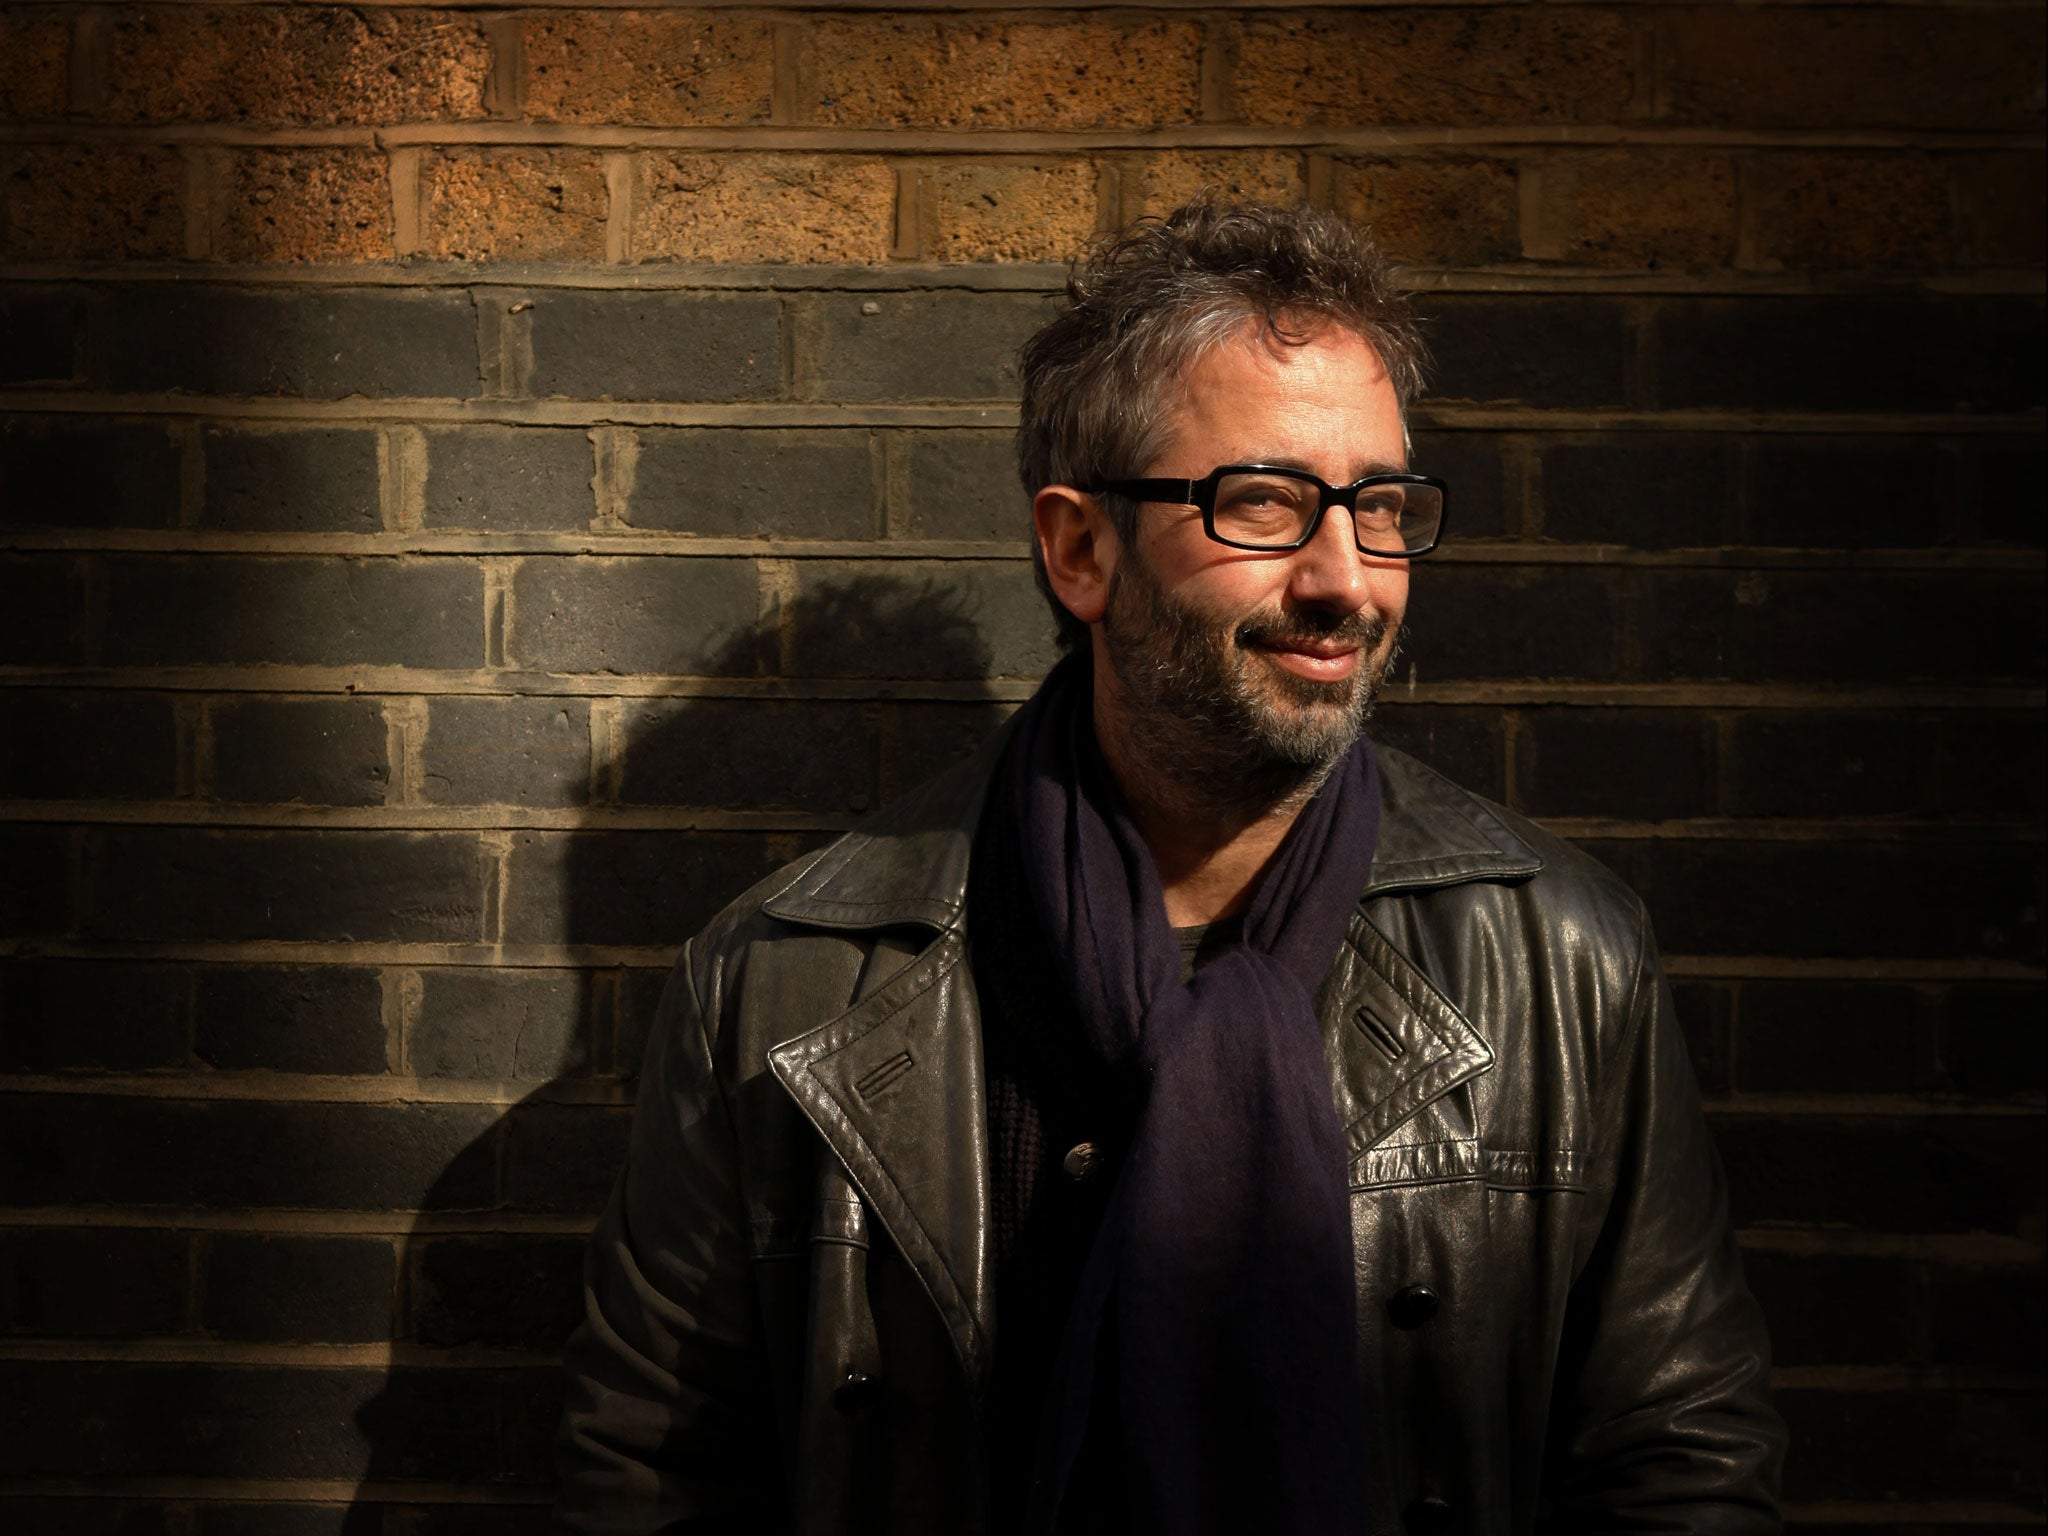 David Baddiel is among the comedians involved in the week-long event